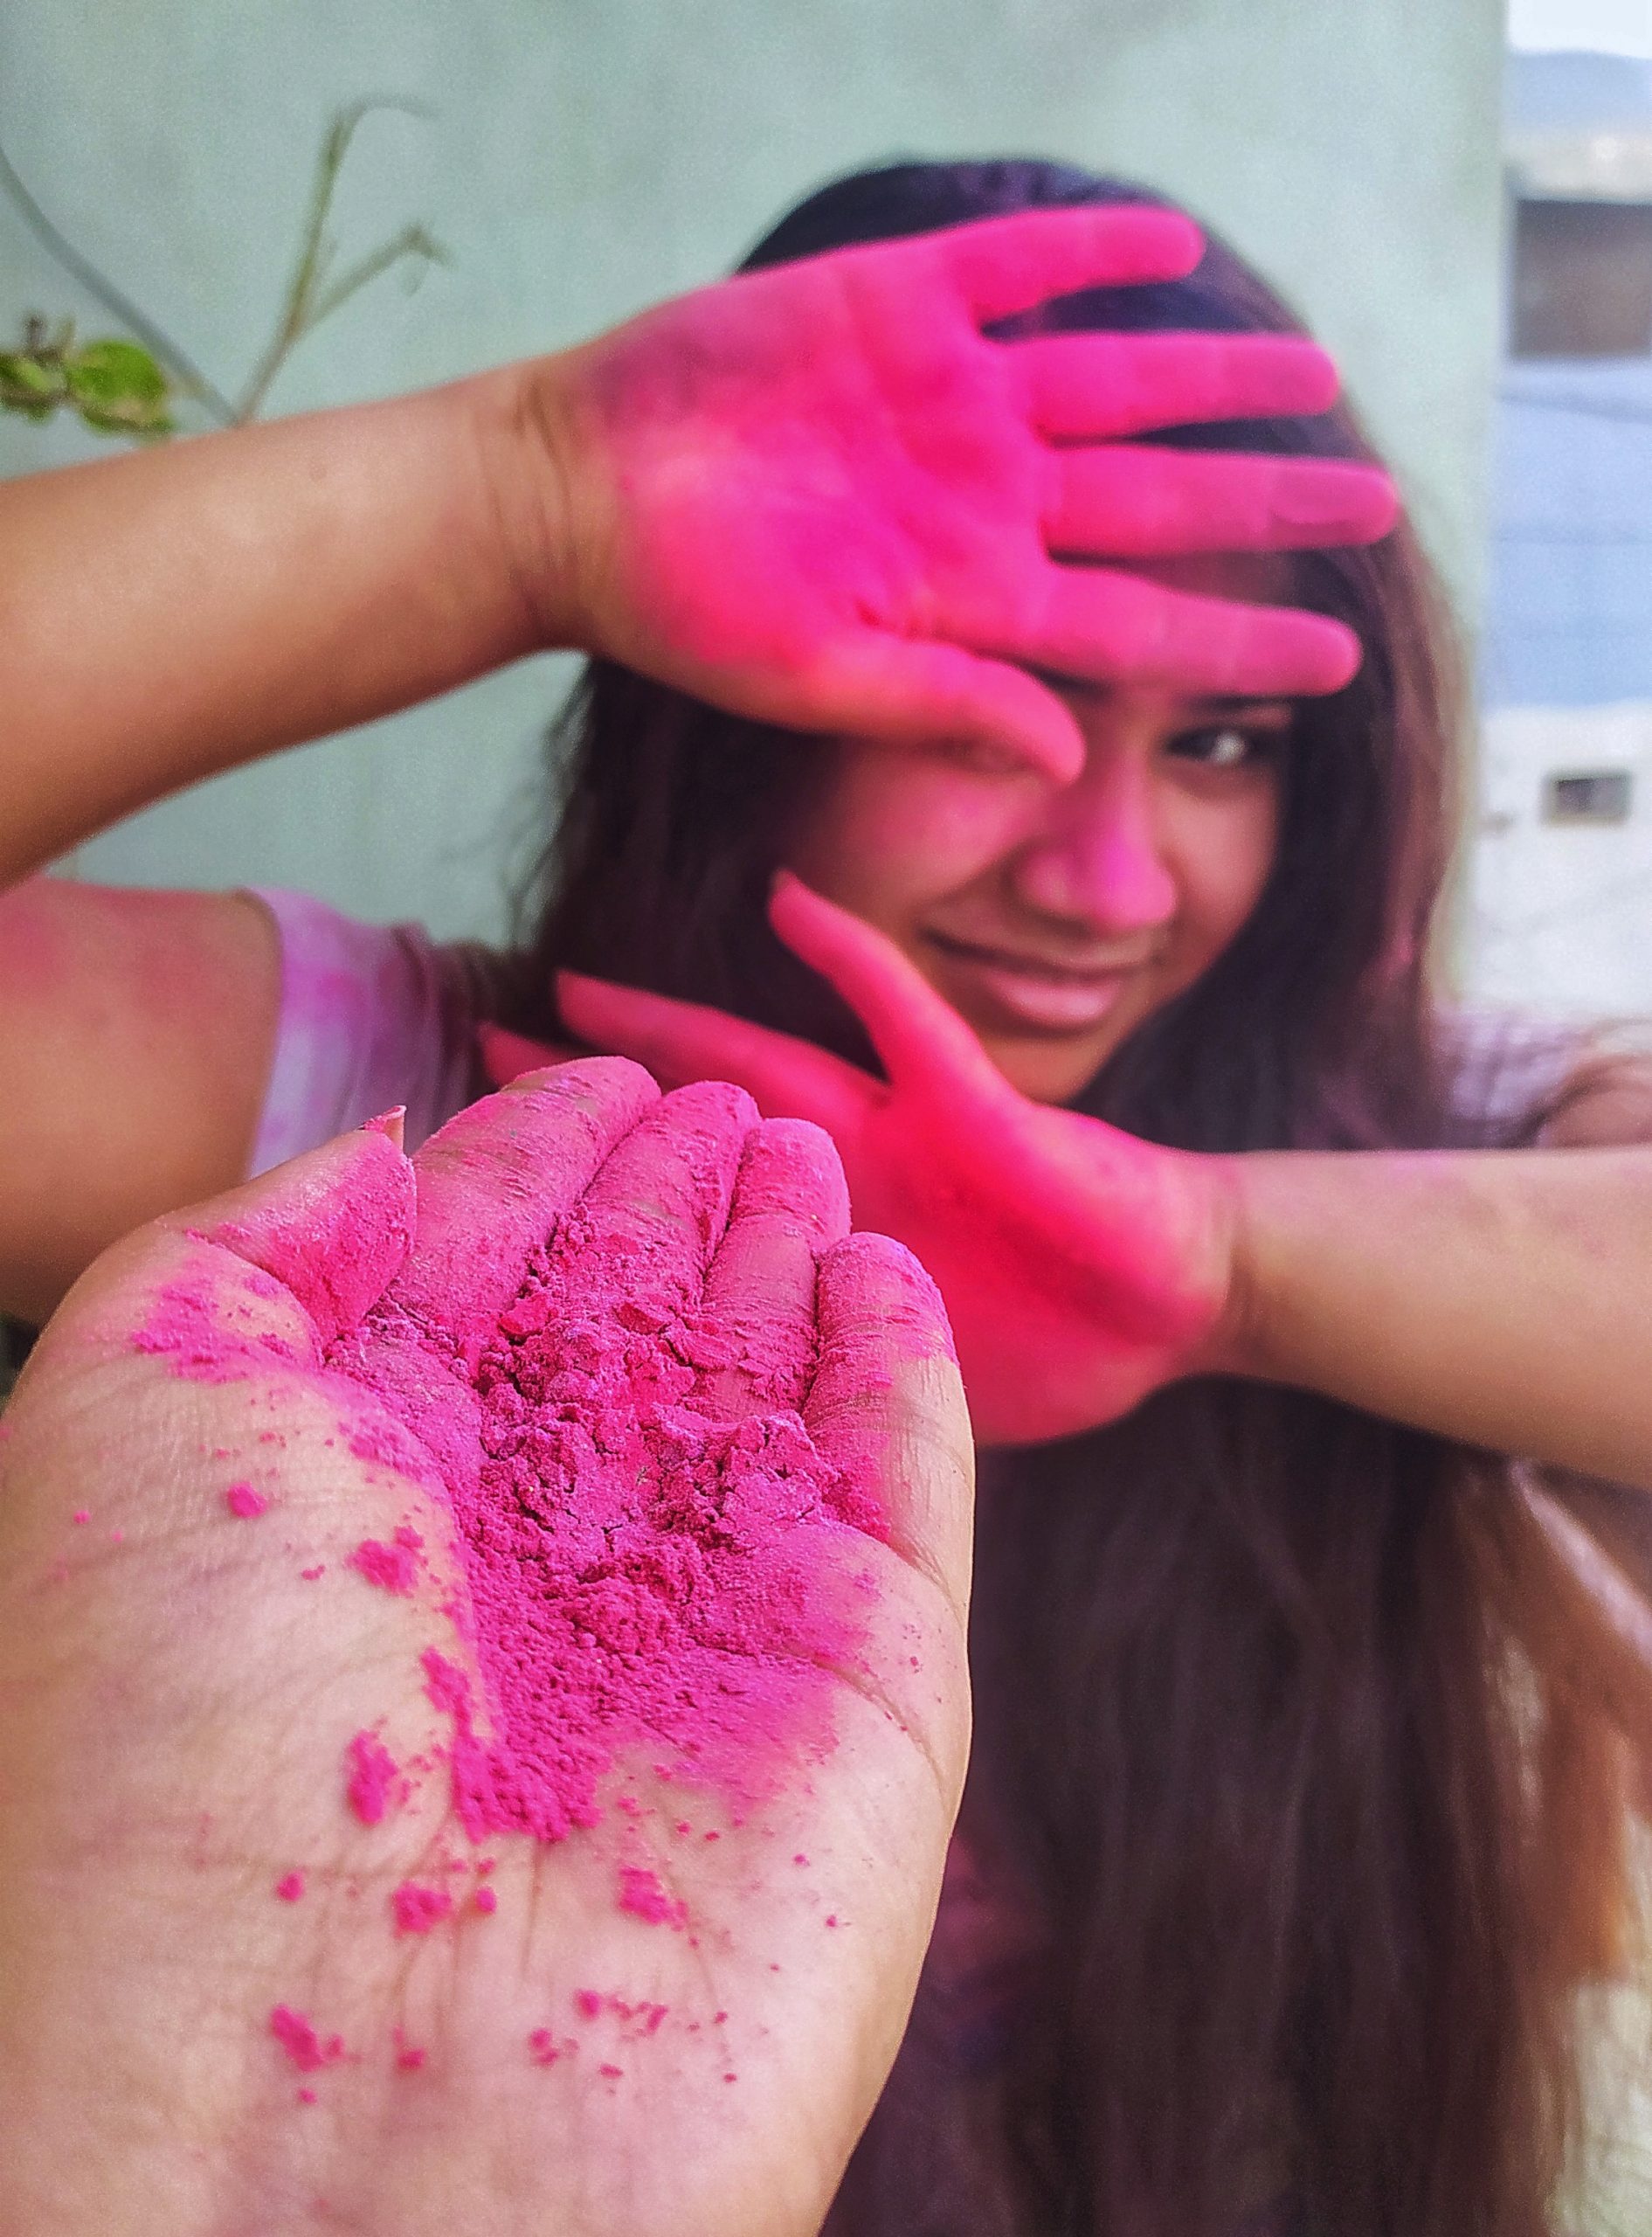 Girls' playing with Holi colors